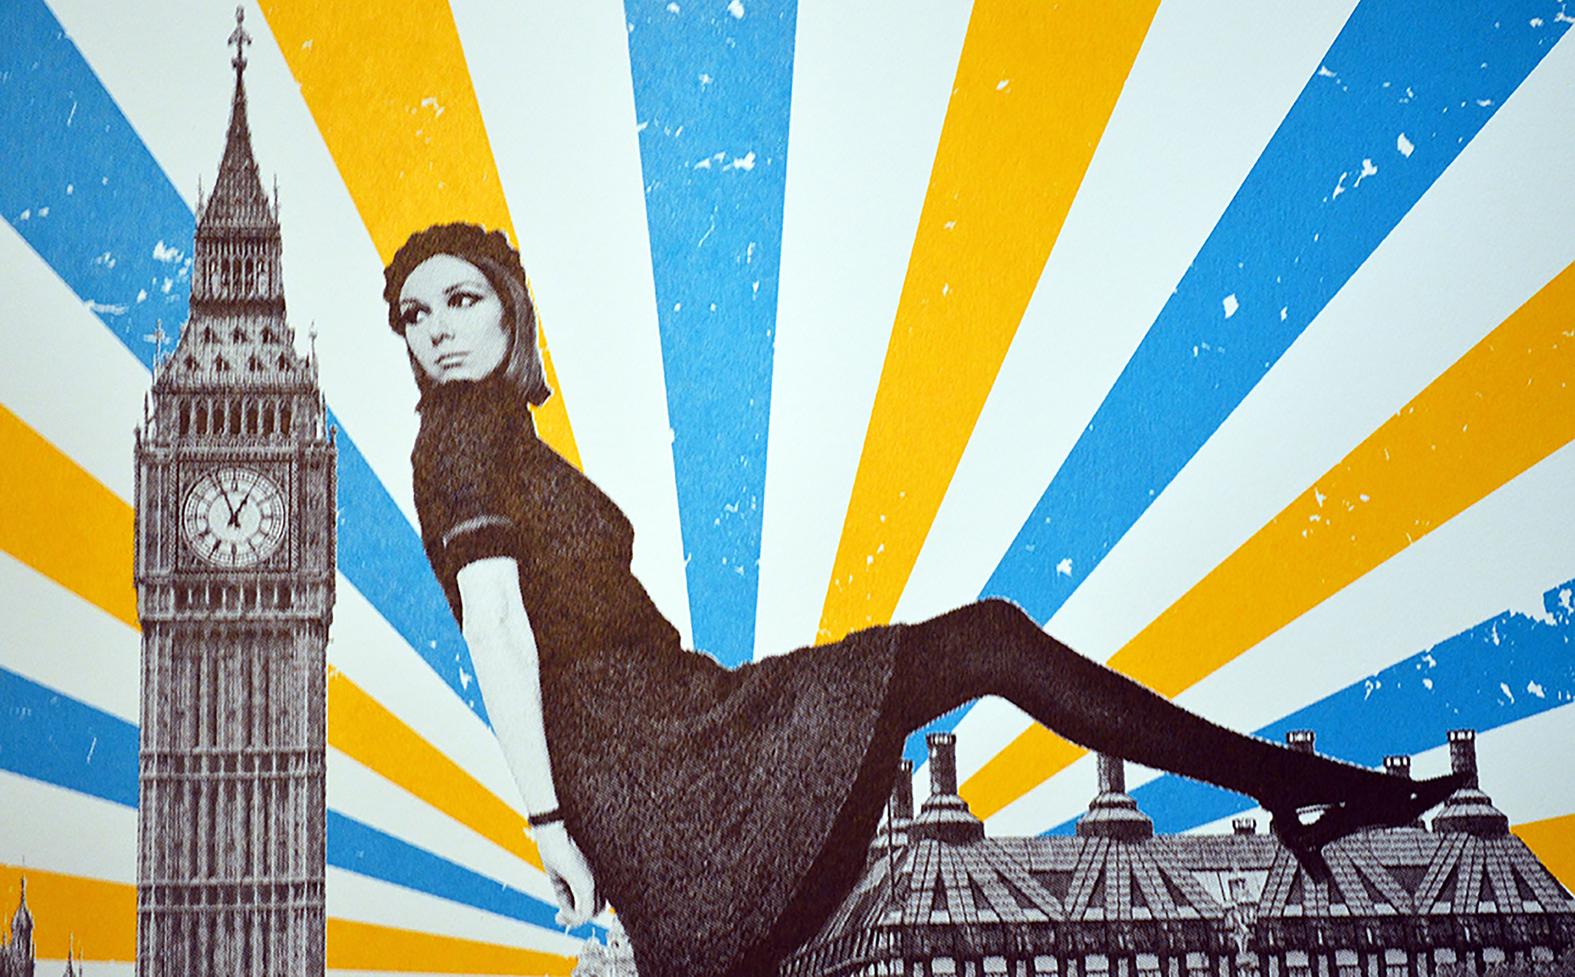 Anne Storno
London Stride
Limited Edition Print
Screenprint on Paper
Size of the image: H:39 cm x W:58 cm
Size of the paper: H:50 cm x W:70 cm

Inspired by Pop art and Surrealist work. A colourful and vibrant London.

Anne Storno surreal